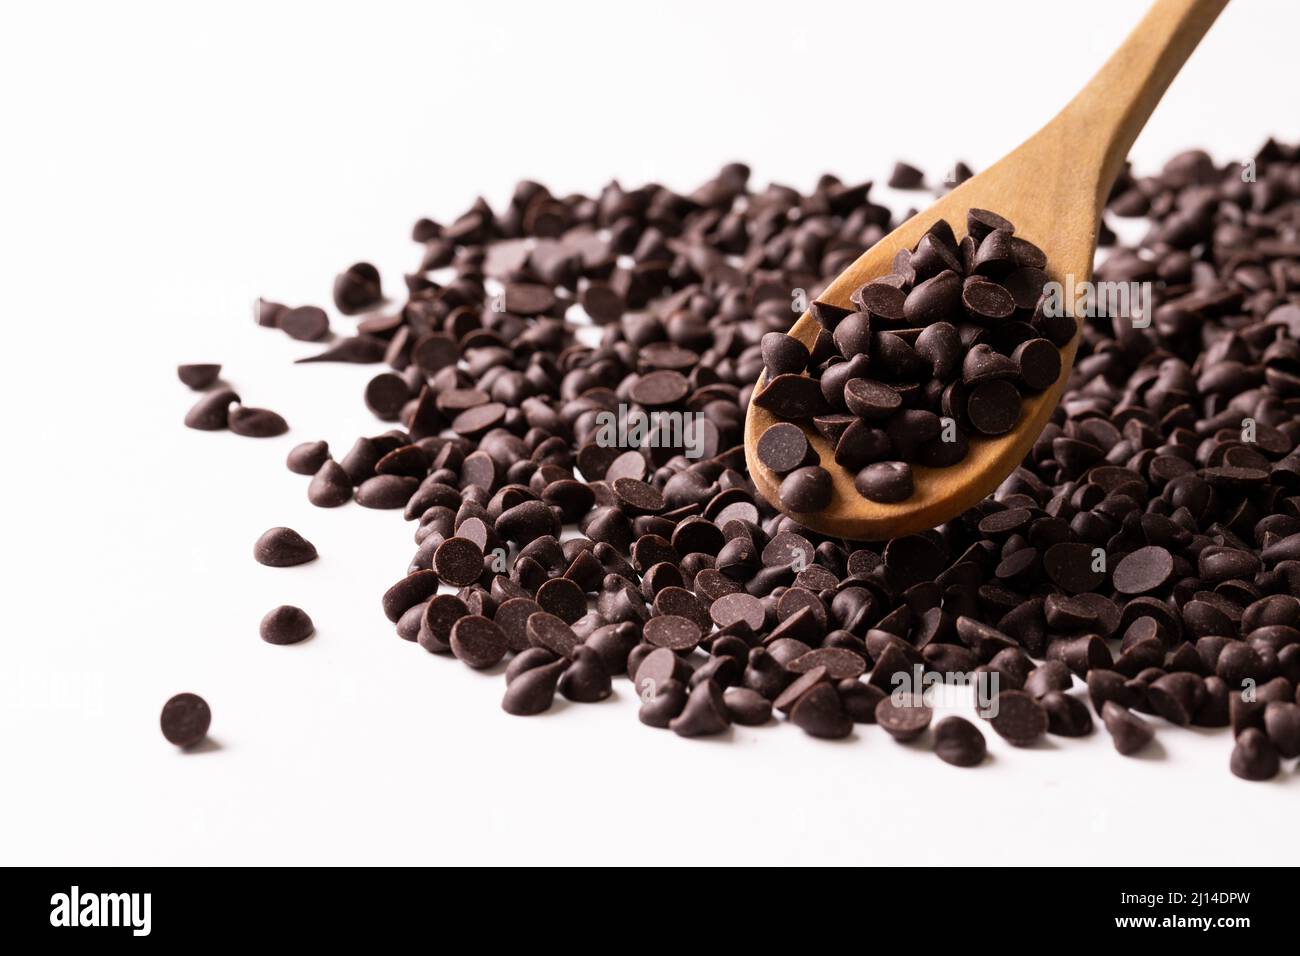 Close-up of wooden spoon with chocolate chips against white background Stock Photo